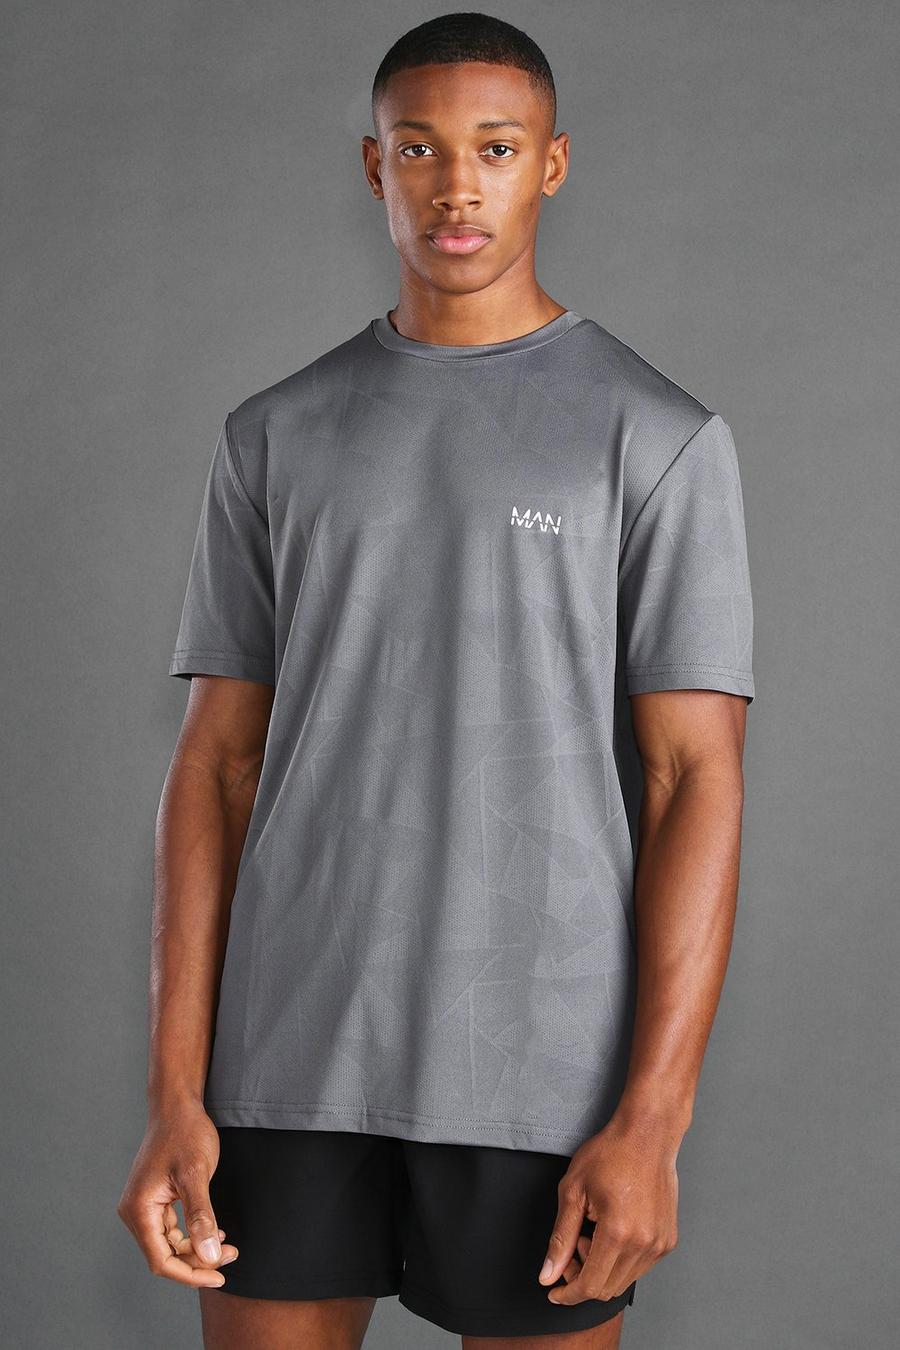 MAN Active Fabric Interest T-shirt, Charcoal image number 1